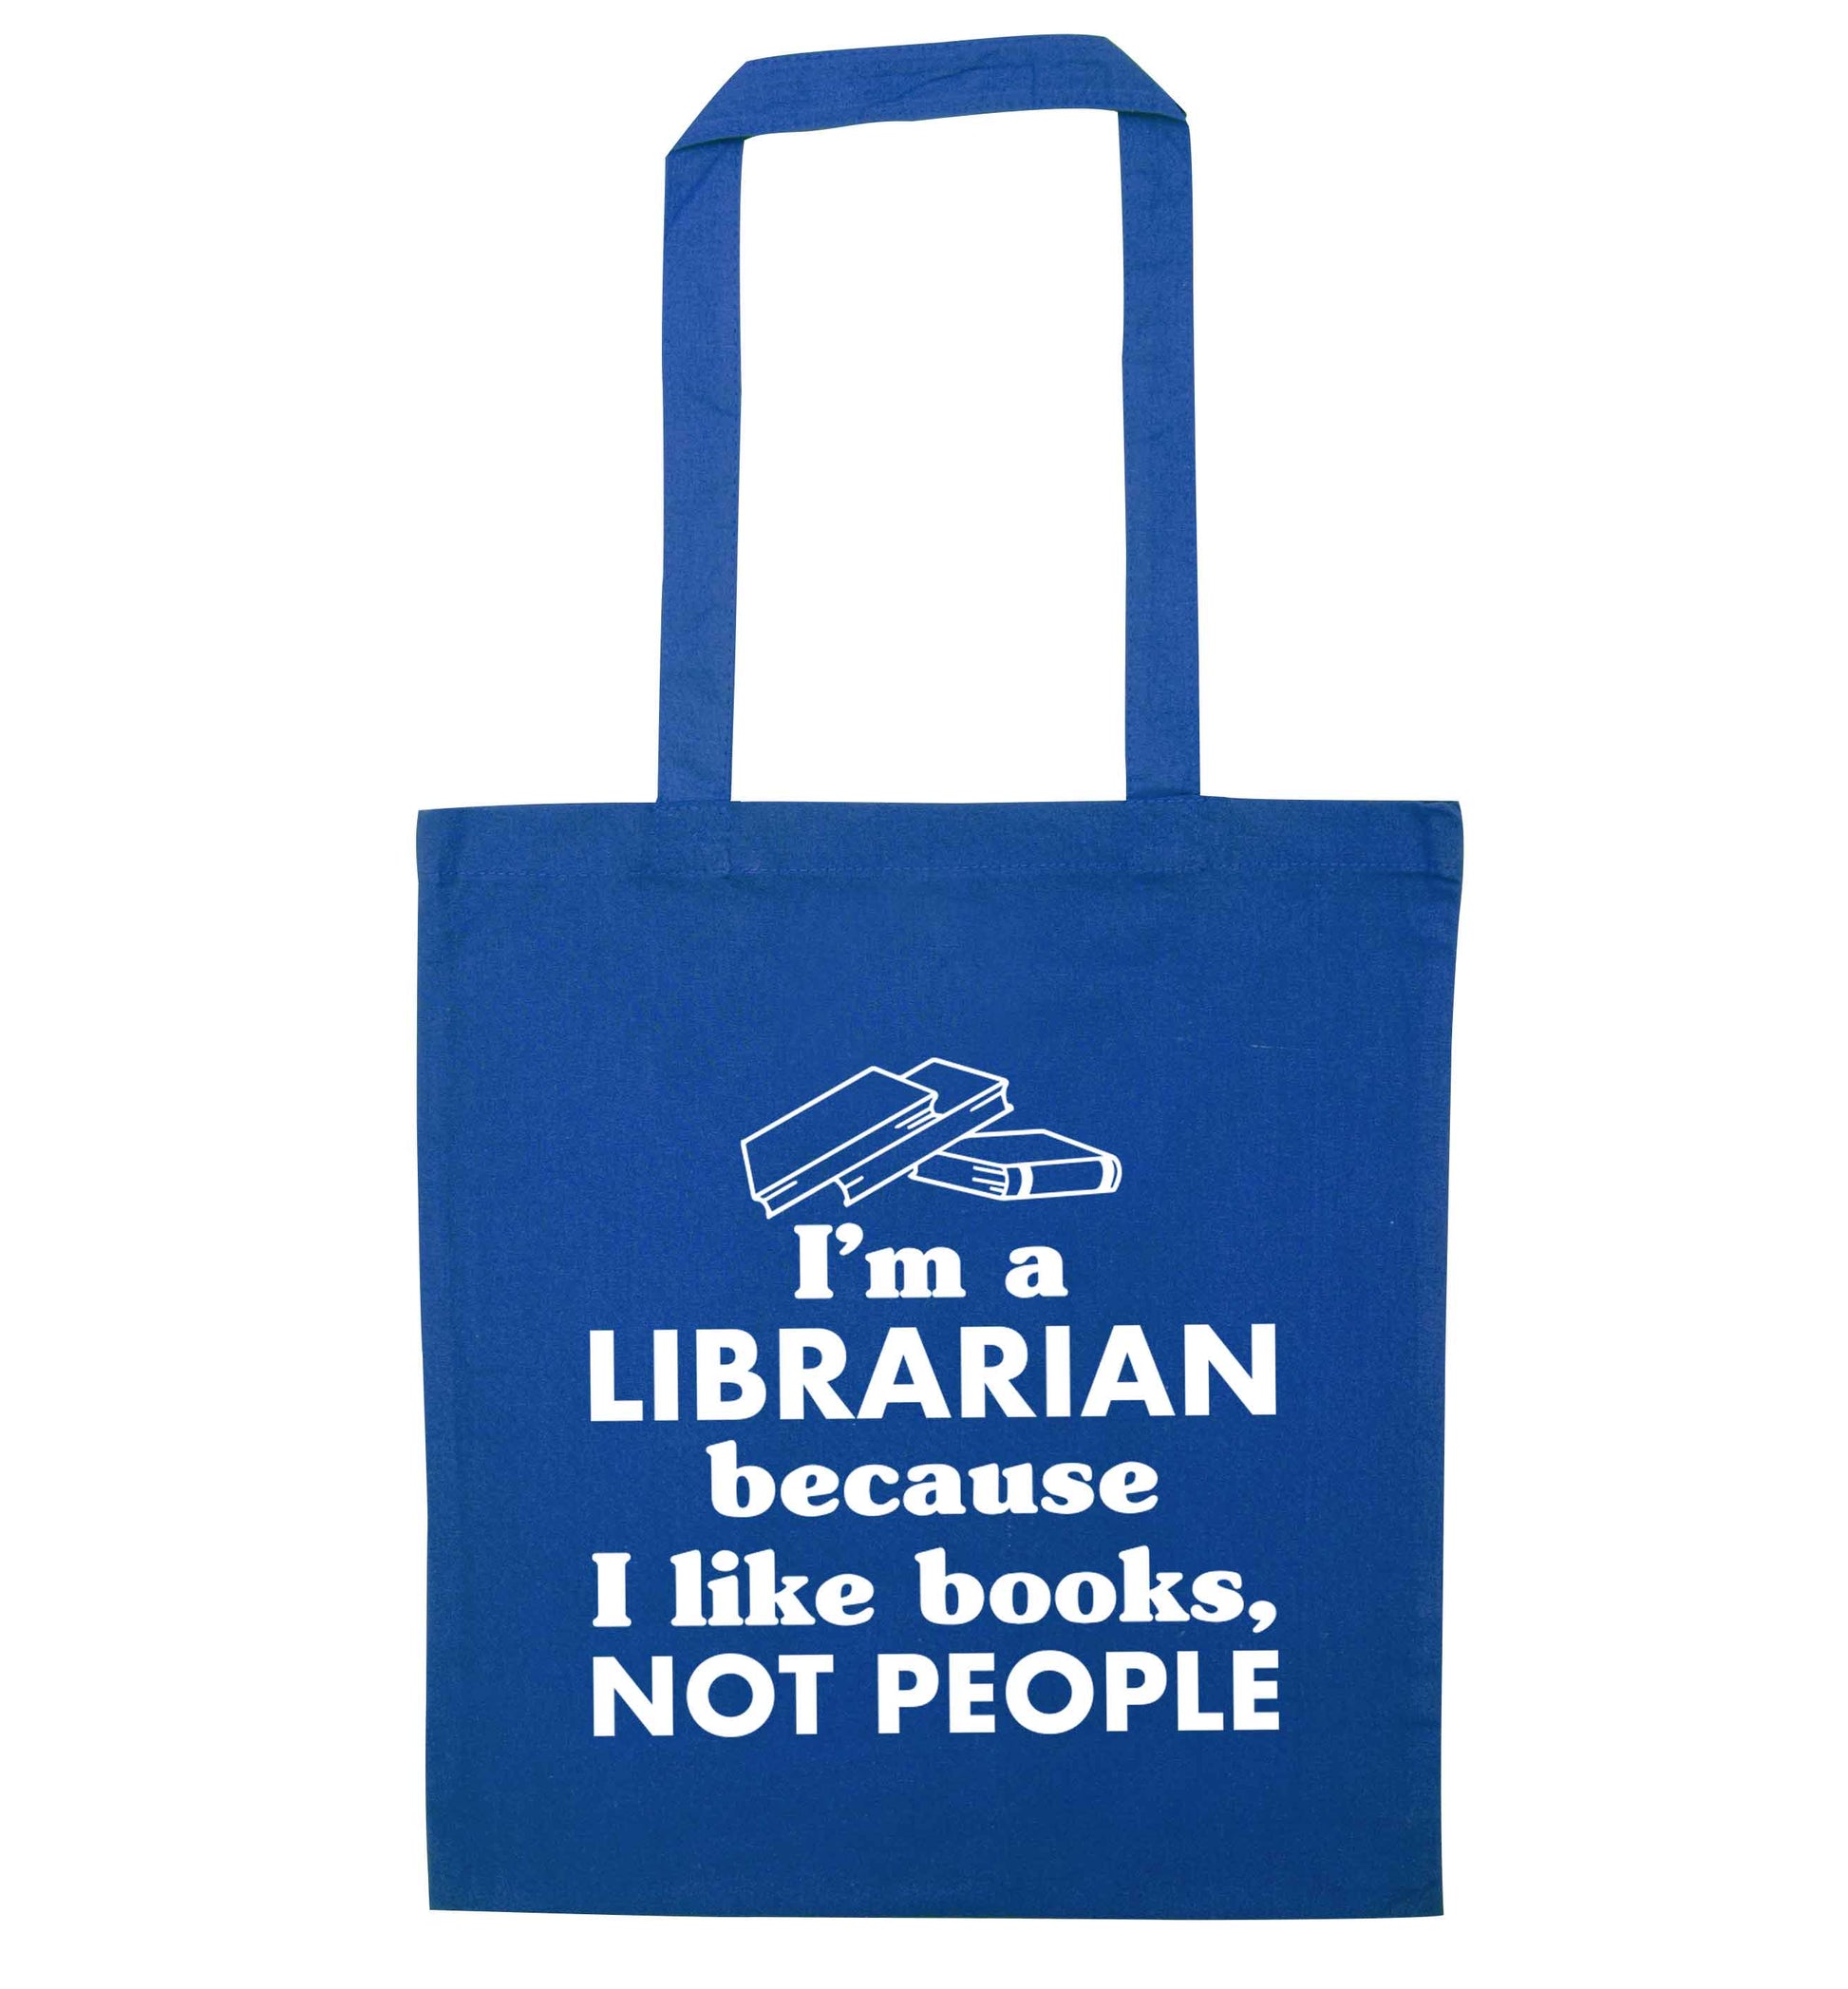 I'm a librarian because I like books not people blue tote bag